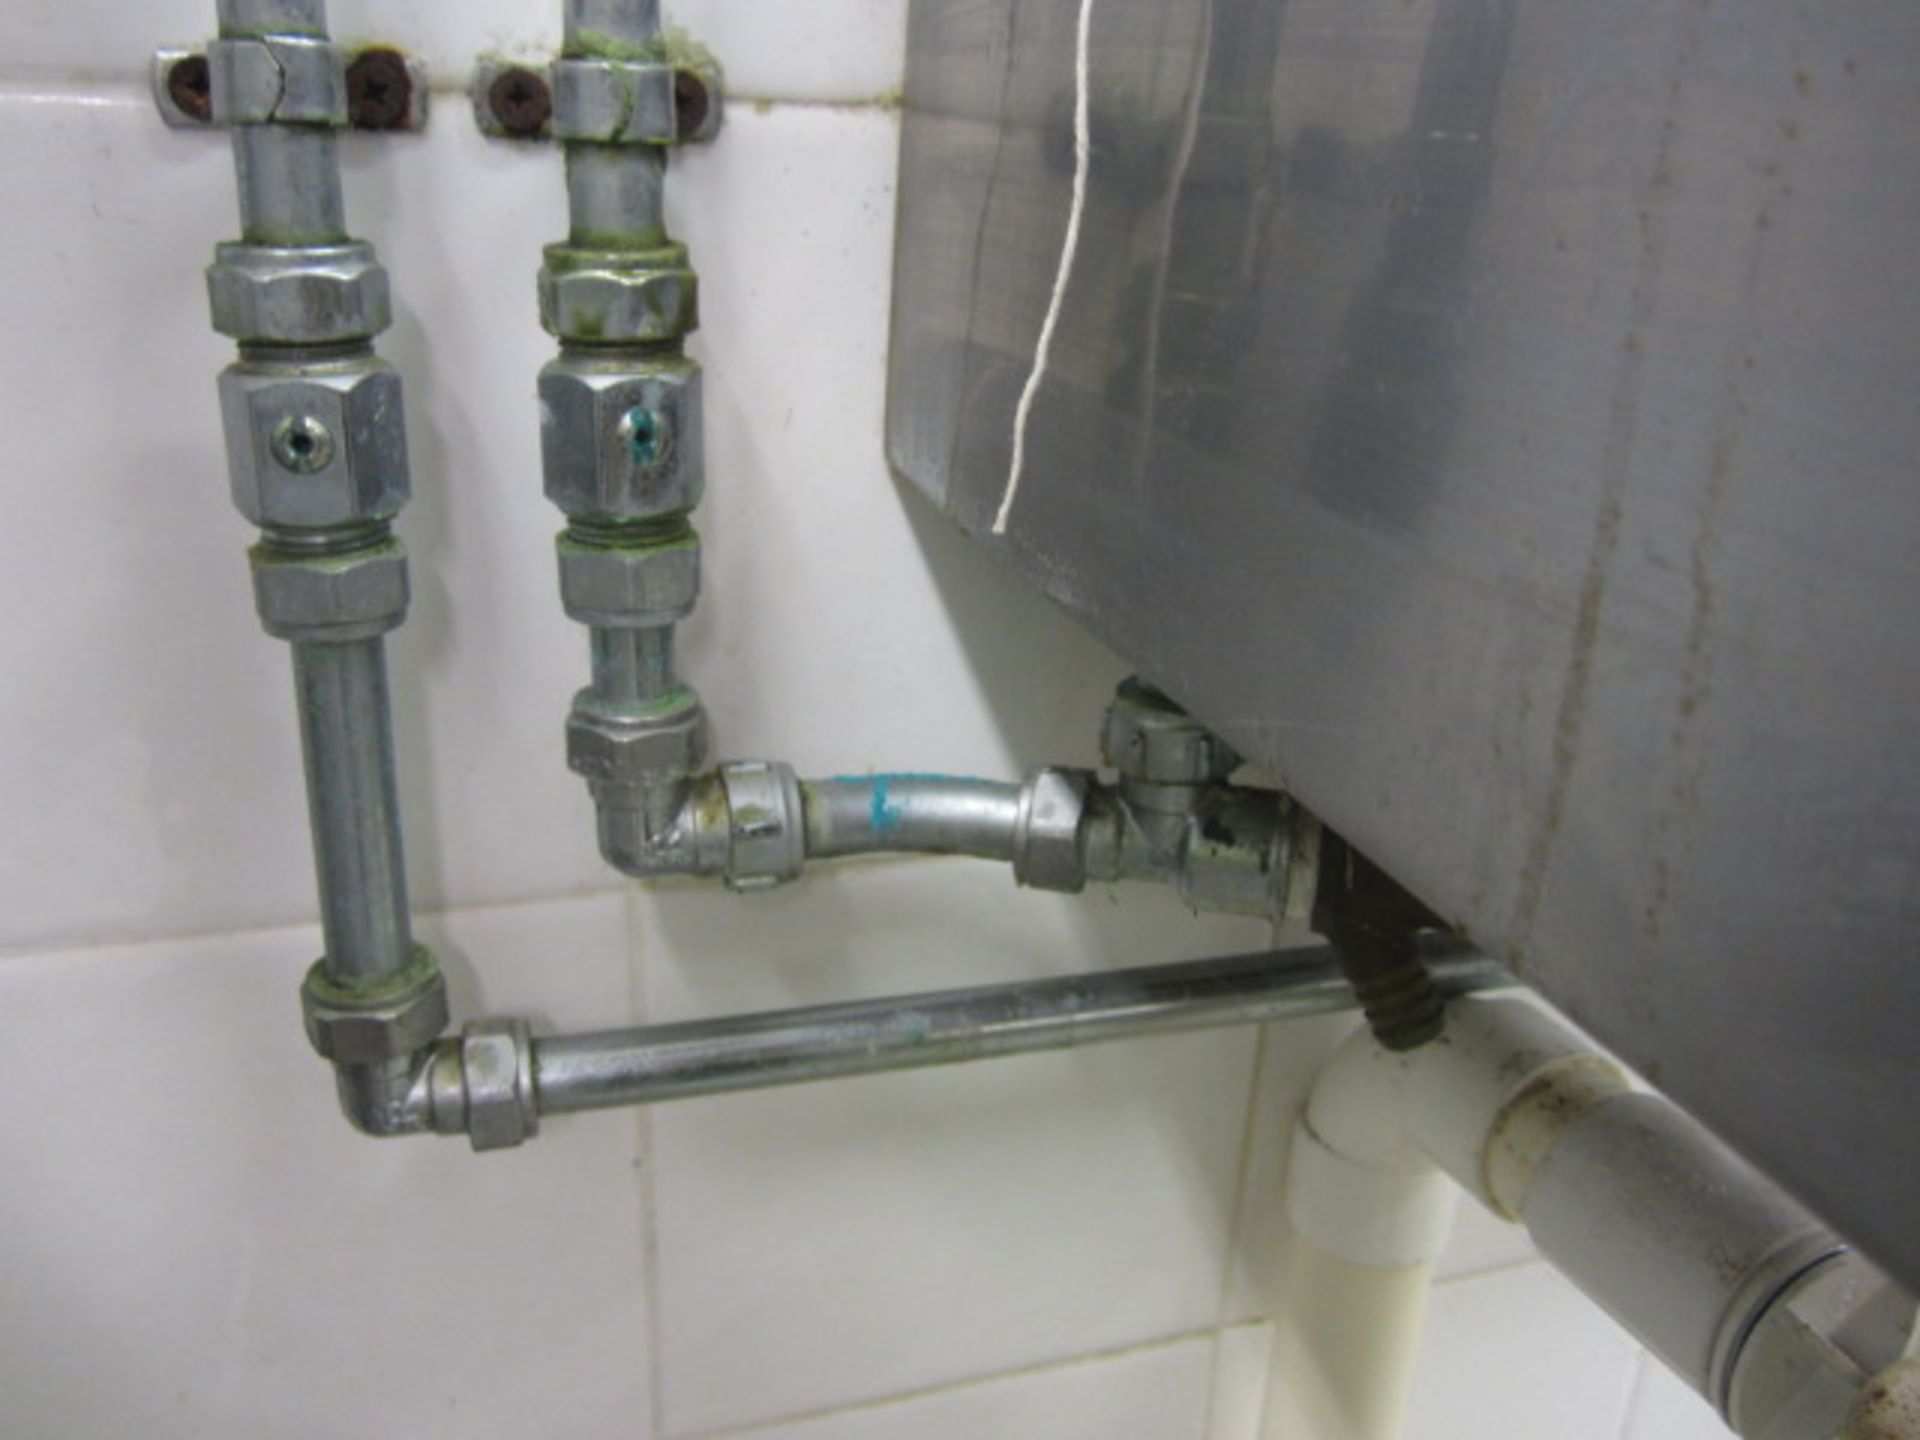 Two stainless steel wall mounted hand basins - Disconnection to be undertaken by the purchaser - Image 2 of 4